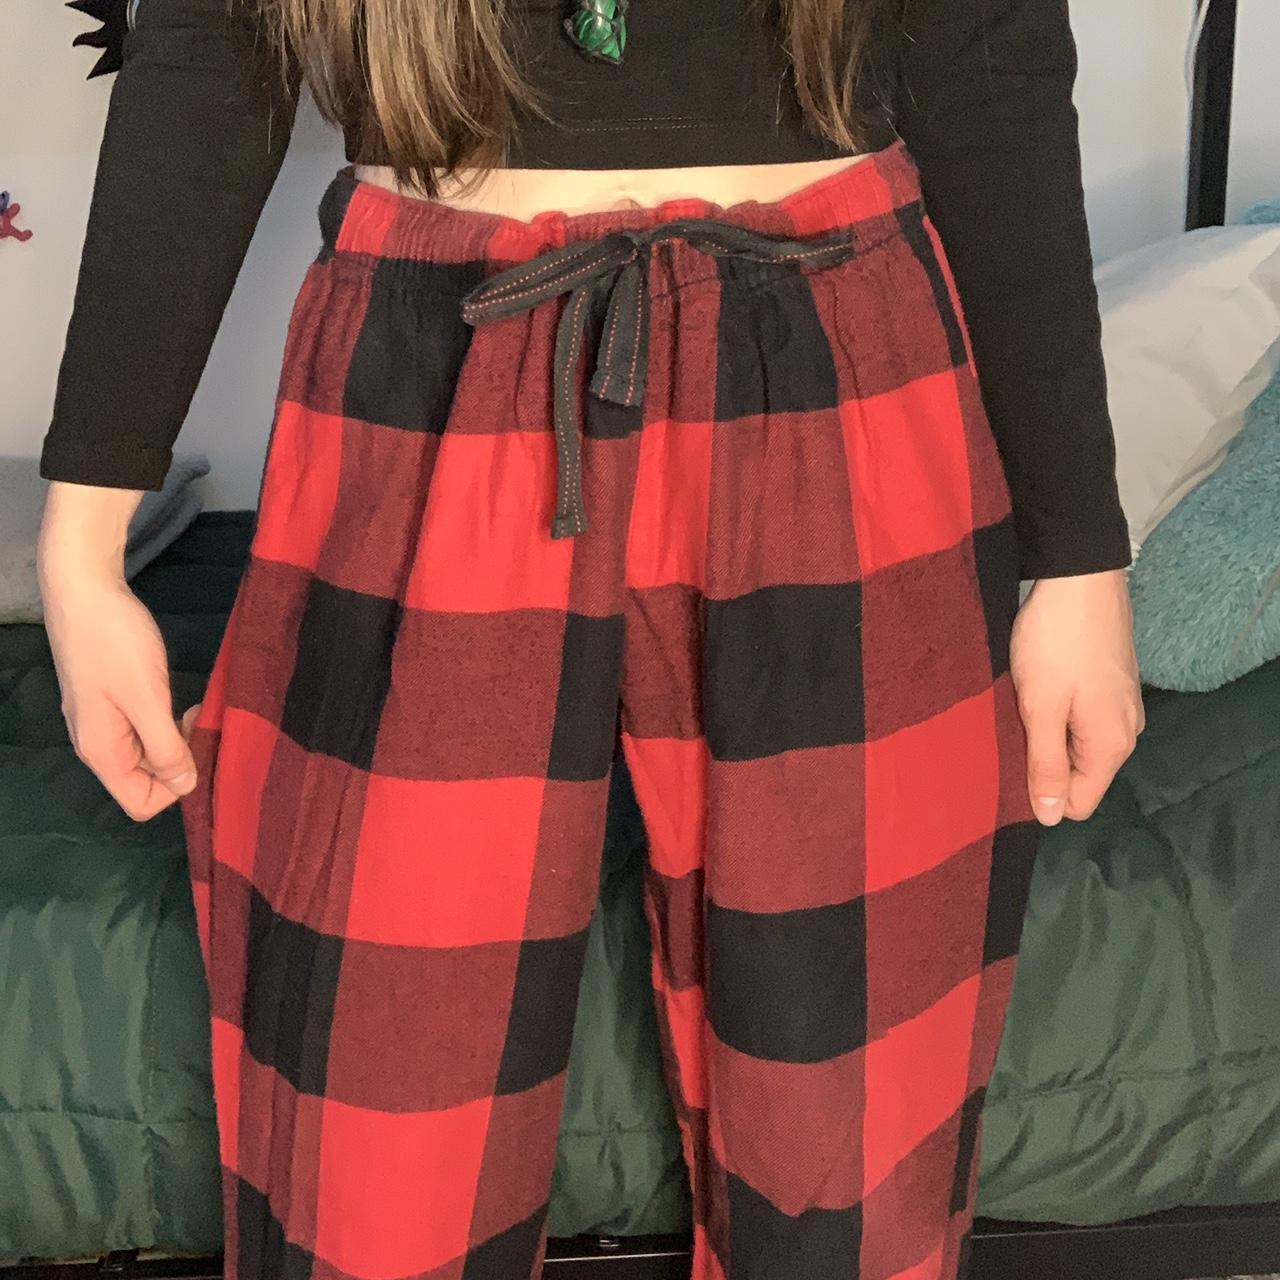 red plaid pajama pants - in great condition, no - Depop